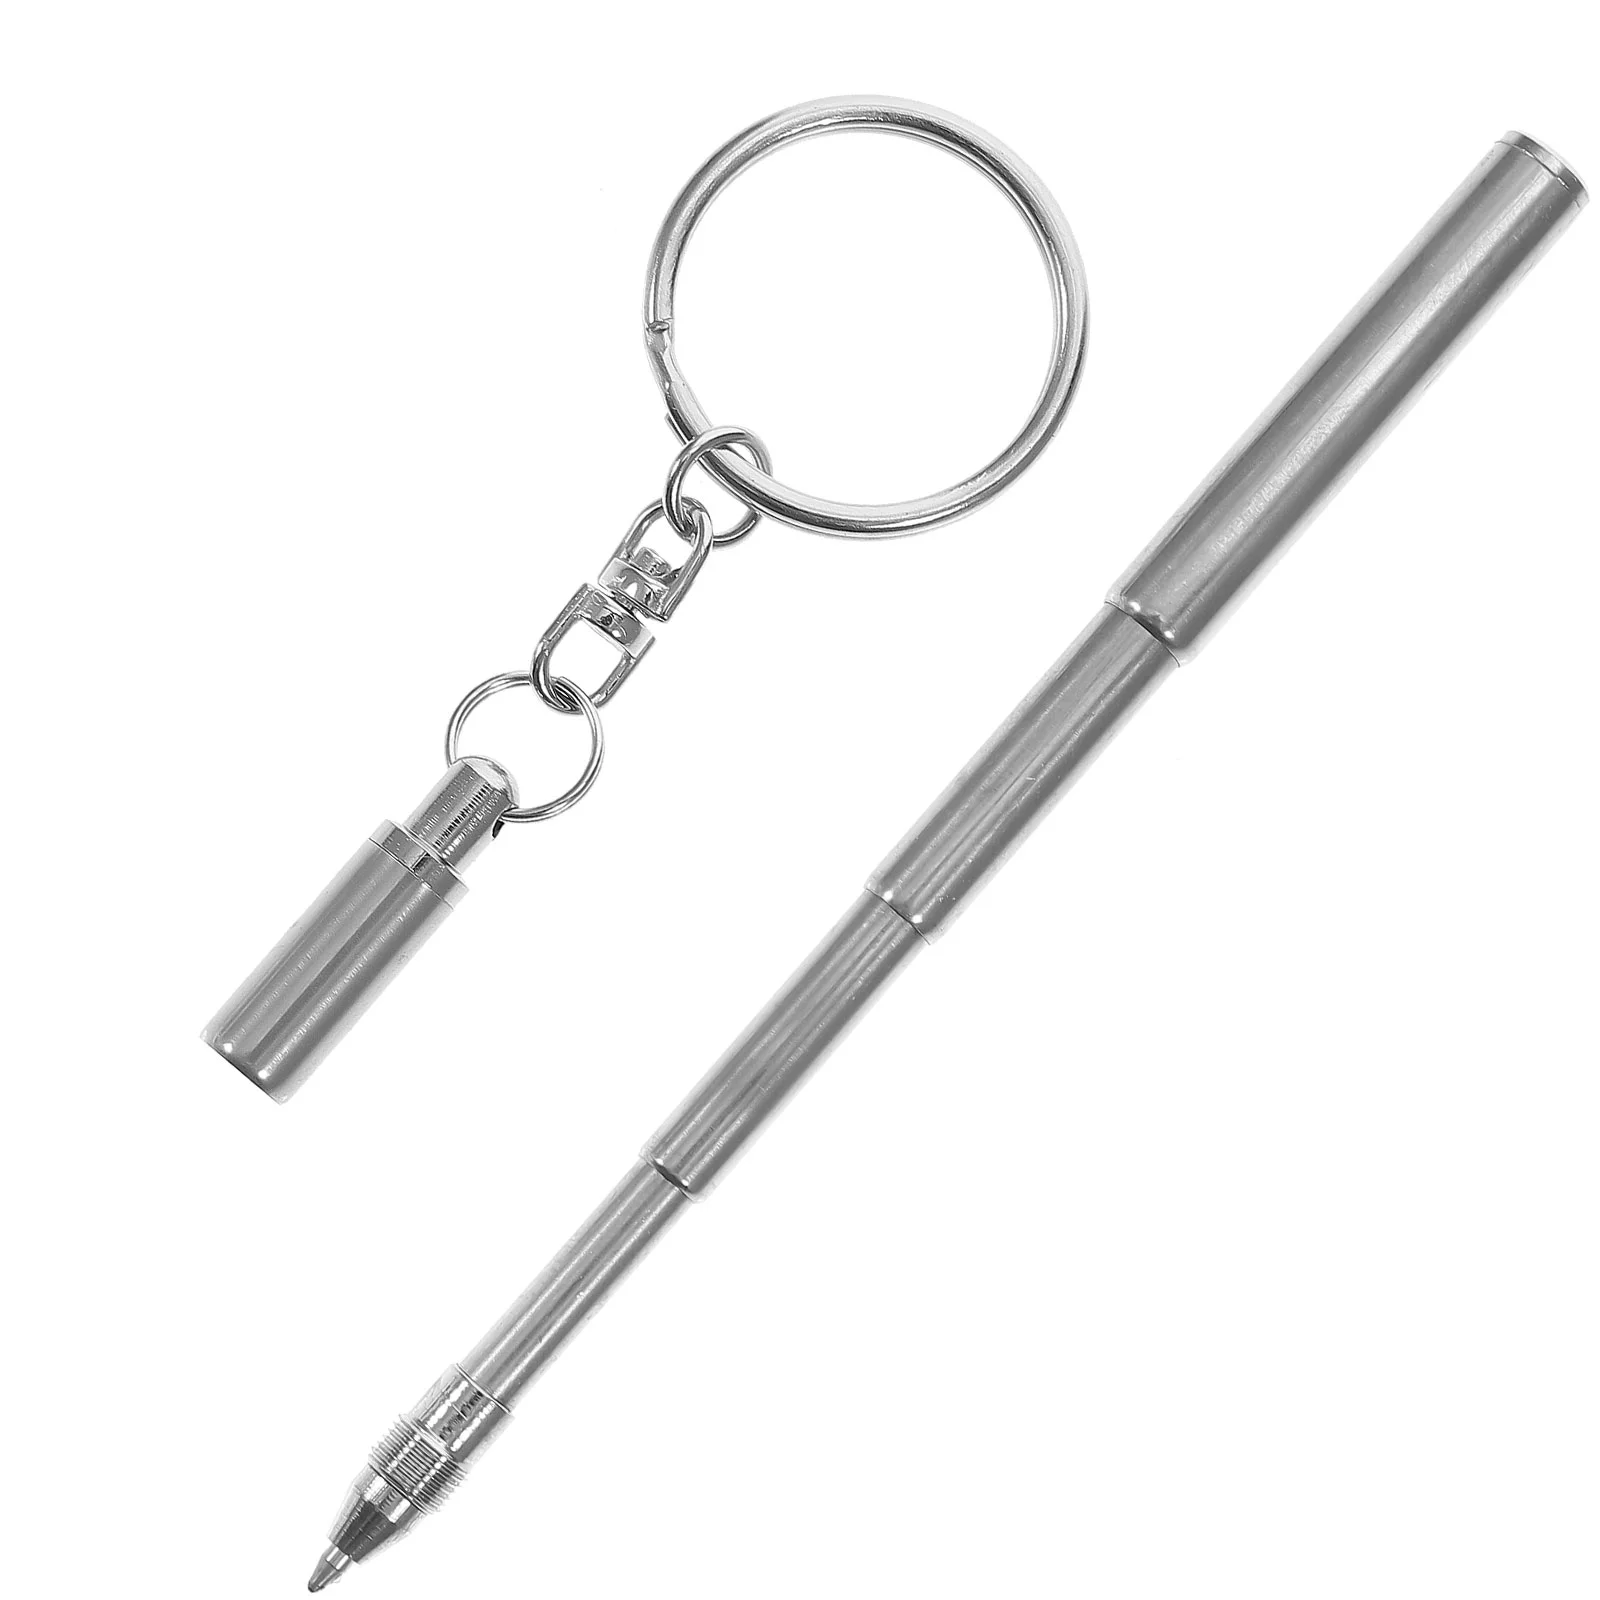 Retractable Pen Shape Keychain Mini Metal Key Ring Portable Stainless Steel Telescopic The Tools Keychain Tools new mini round velvet jewelry box travel portable zipper jewelry storage box earring necklace ring organizer display holder